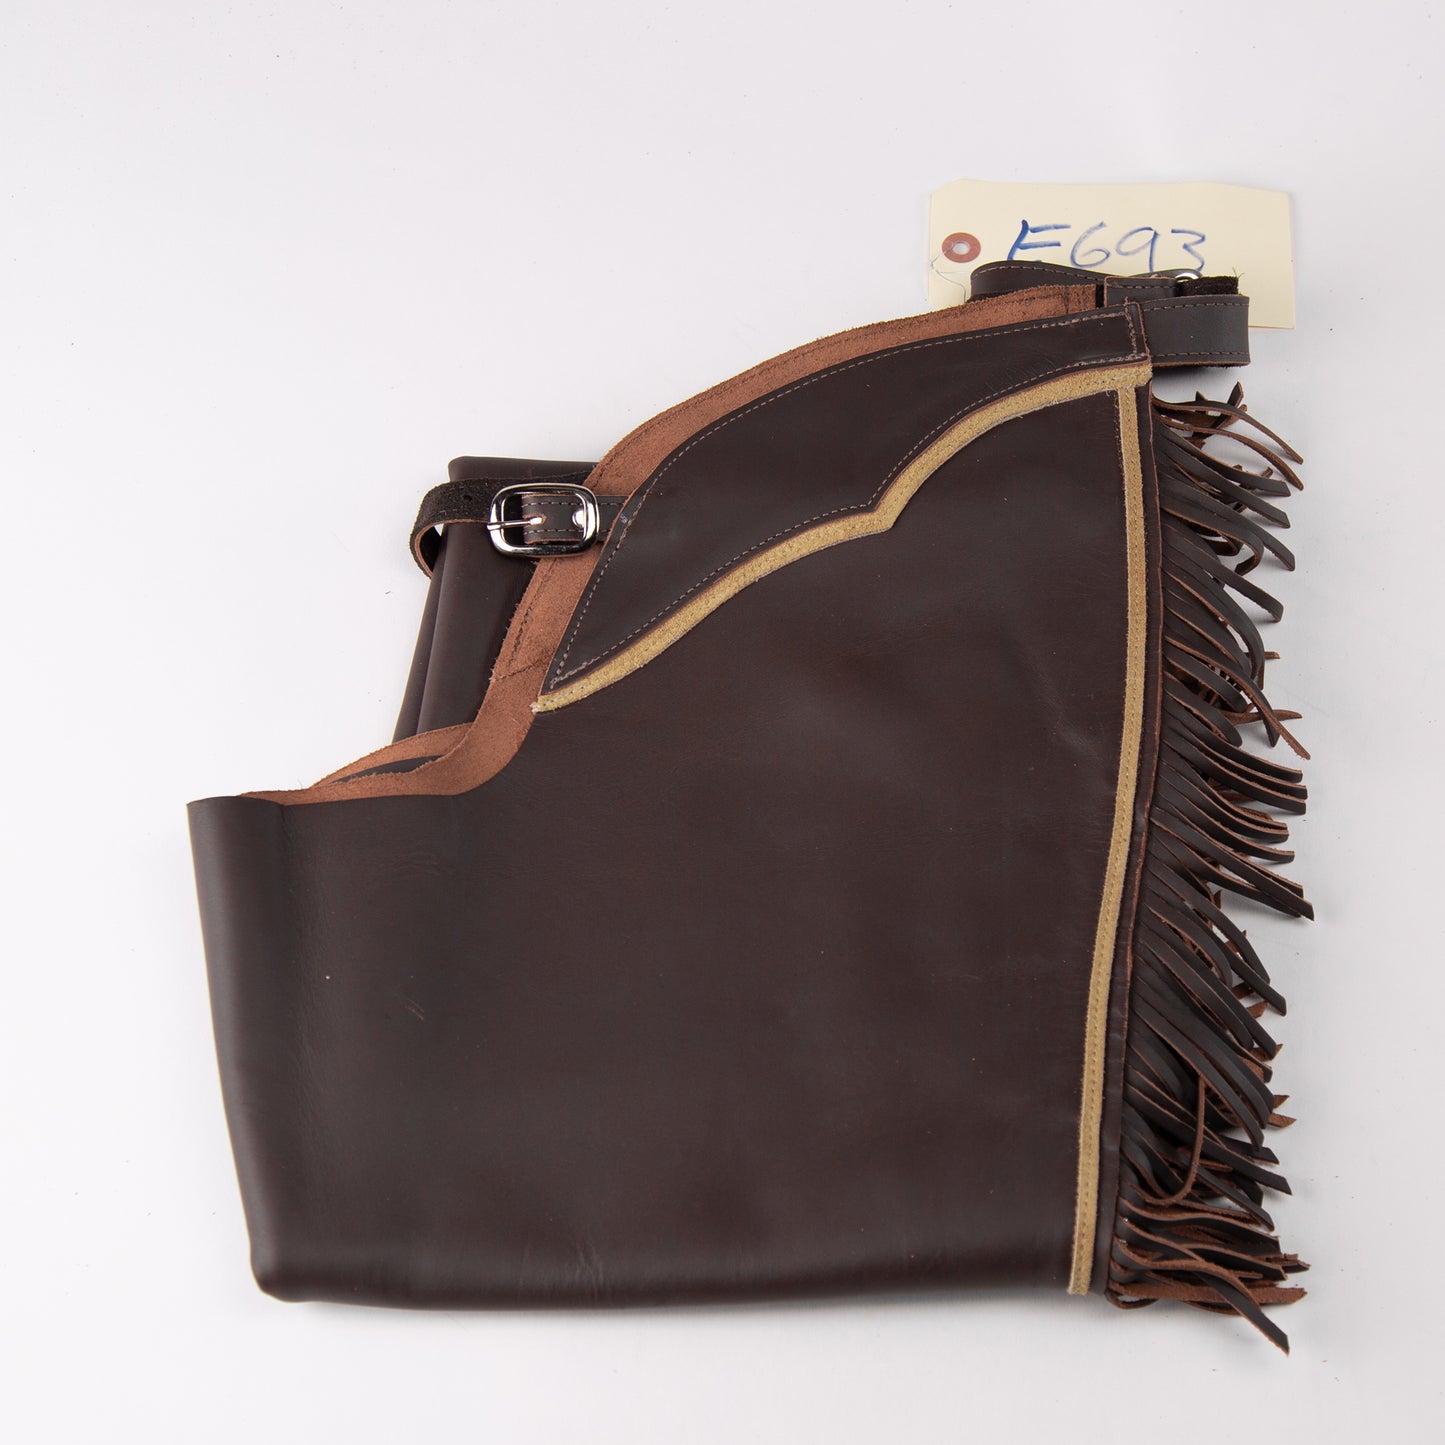 English Schooling Chaps - Brown Top Grain Leather - Fringe and Taupe Stripes